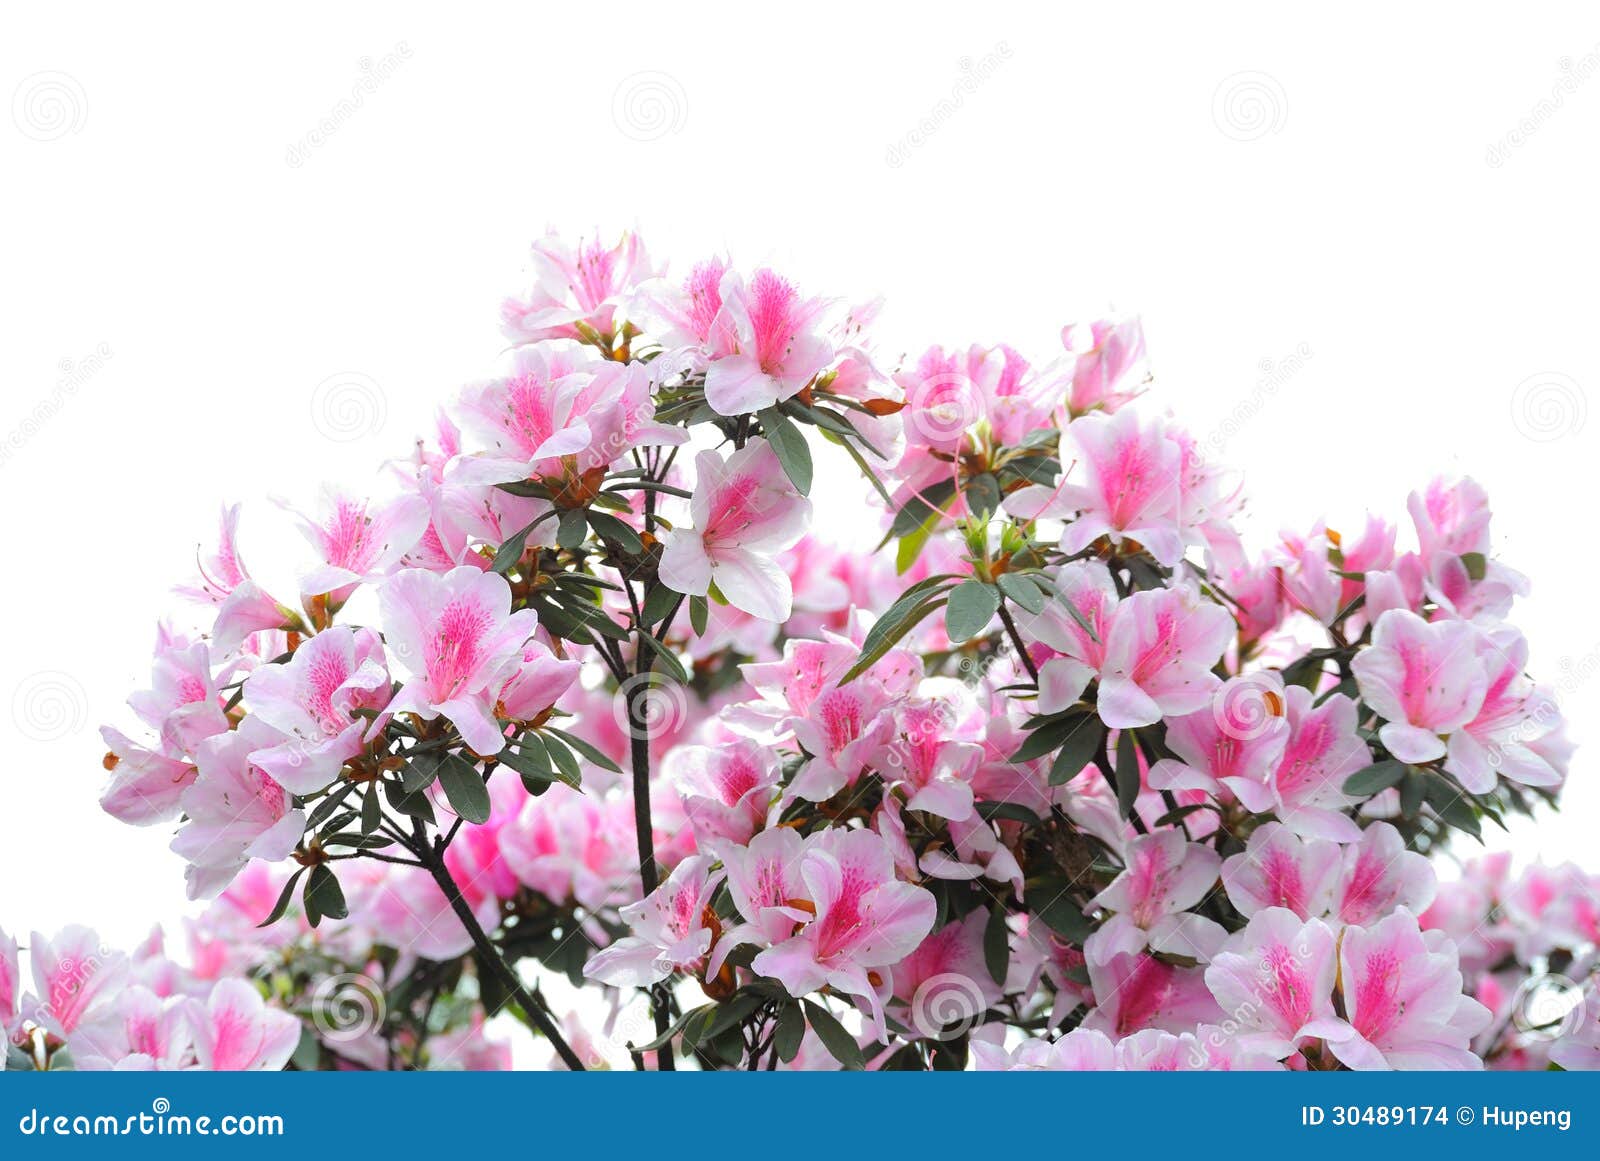 pink and white azalea blooms